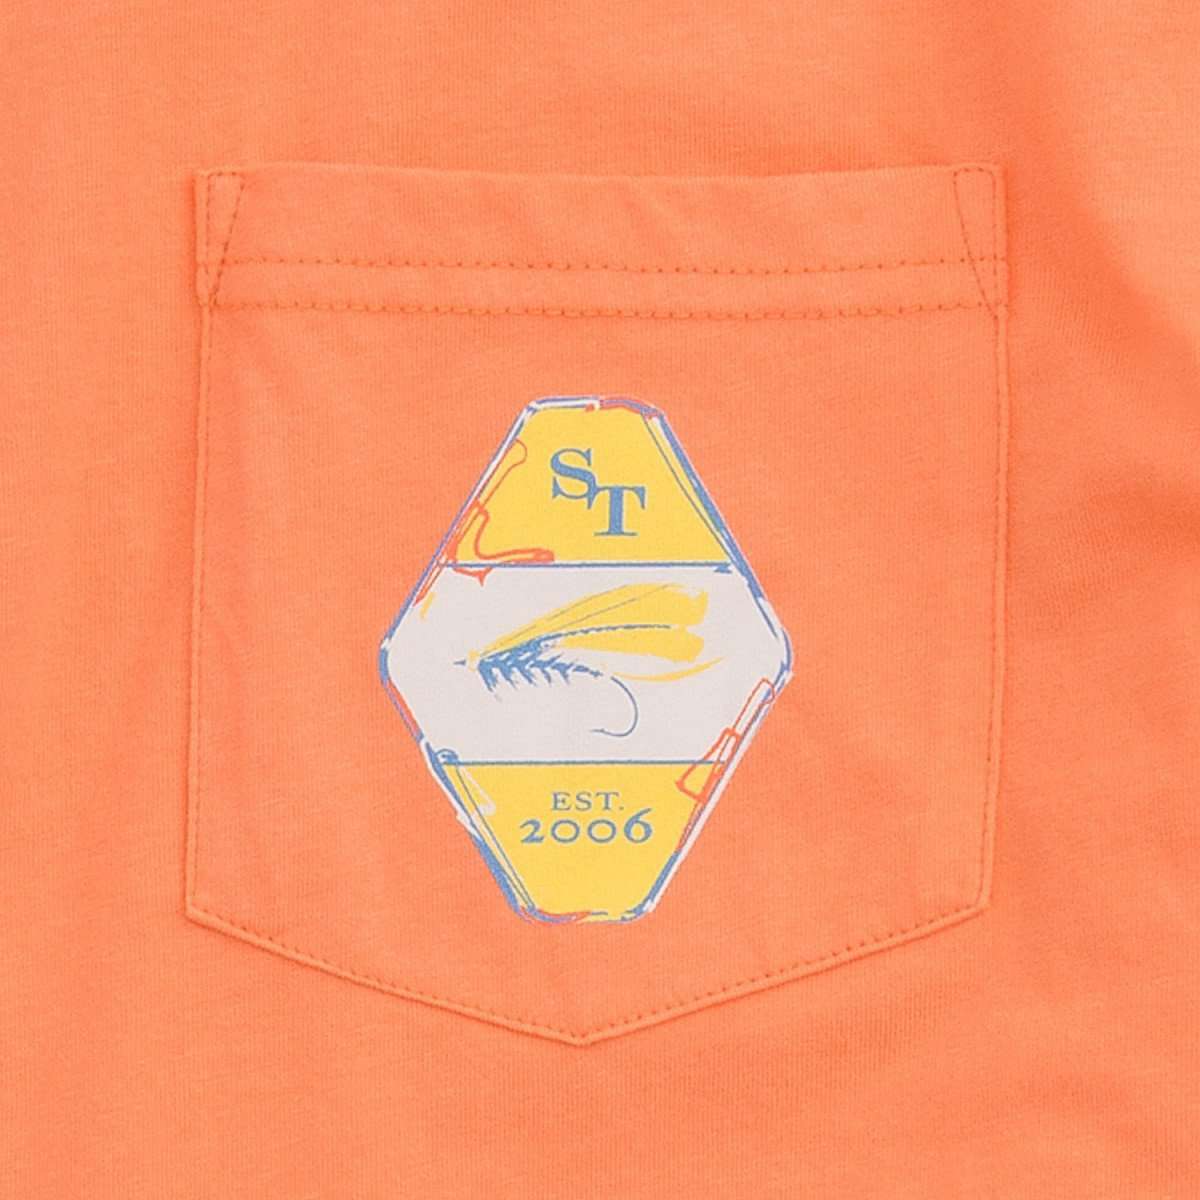 The Reel Deal Tee-Shirt in Caribbean Estate Orange by Southern Tide - Country Club Prep